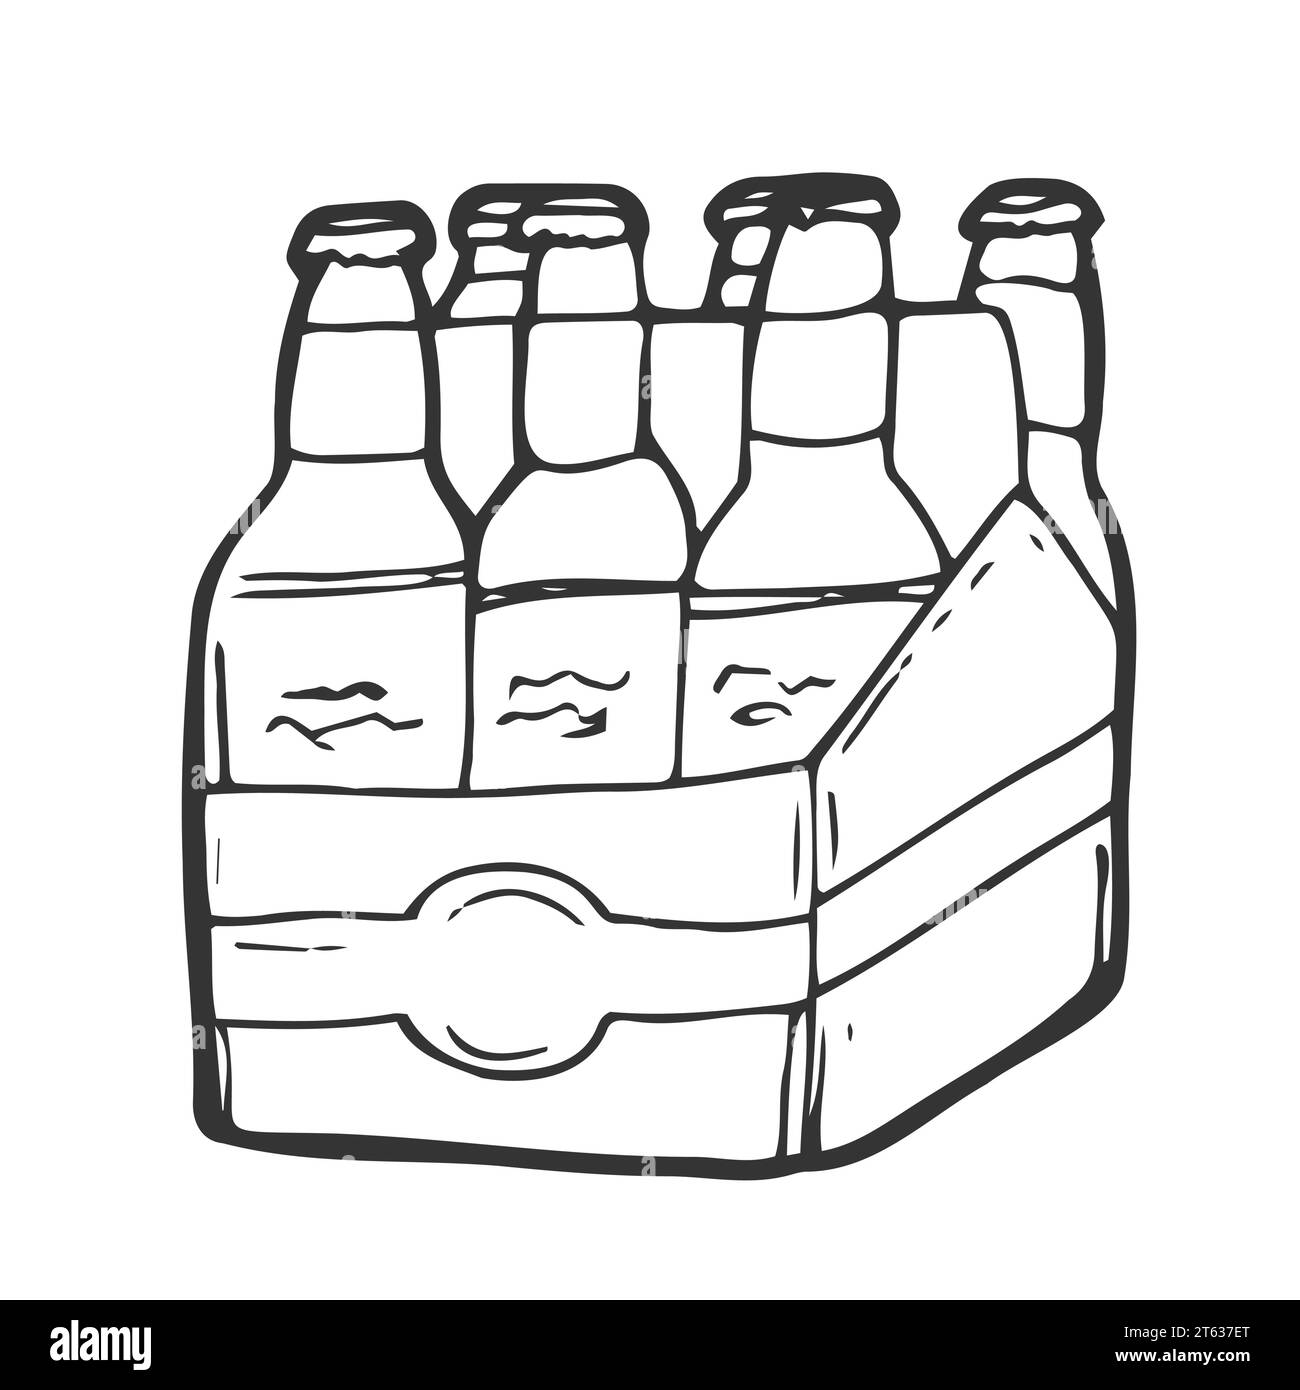 Beer six pack in three boxes. Doodle style Stock Vector